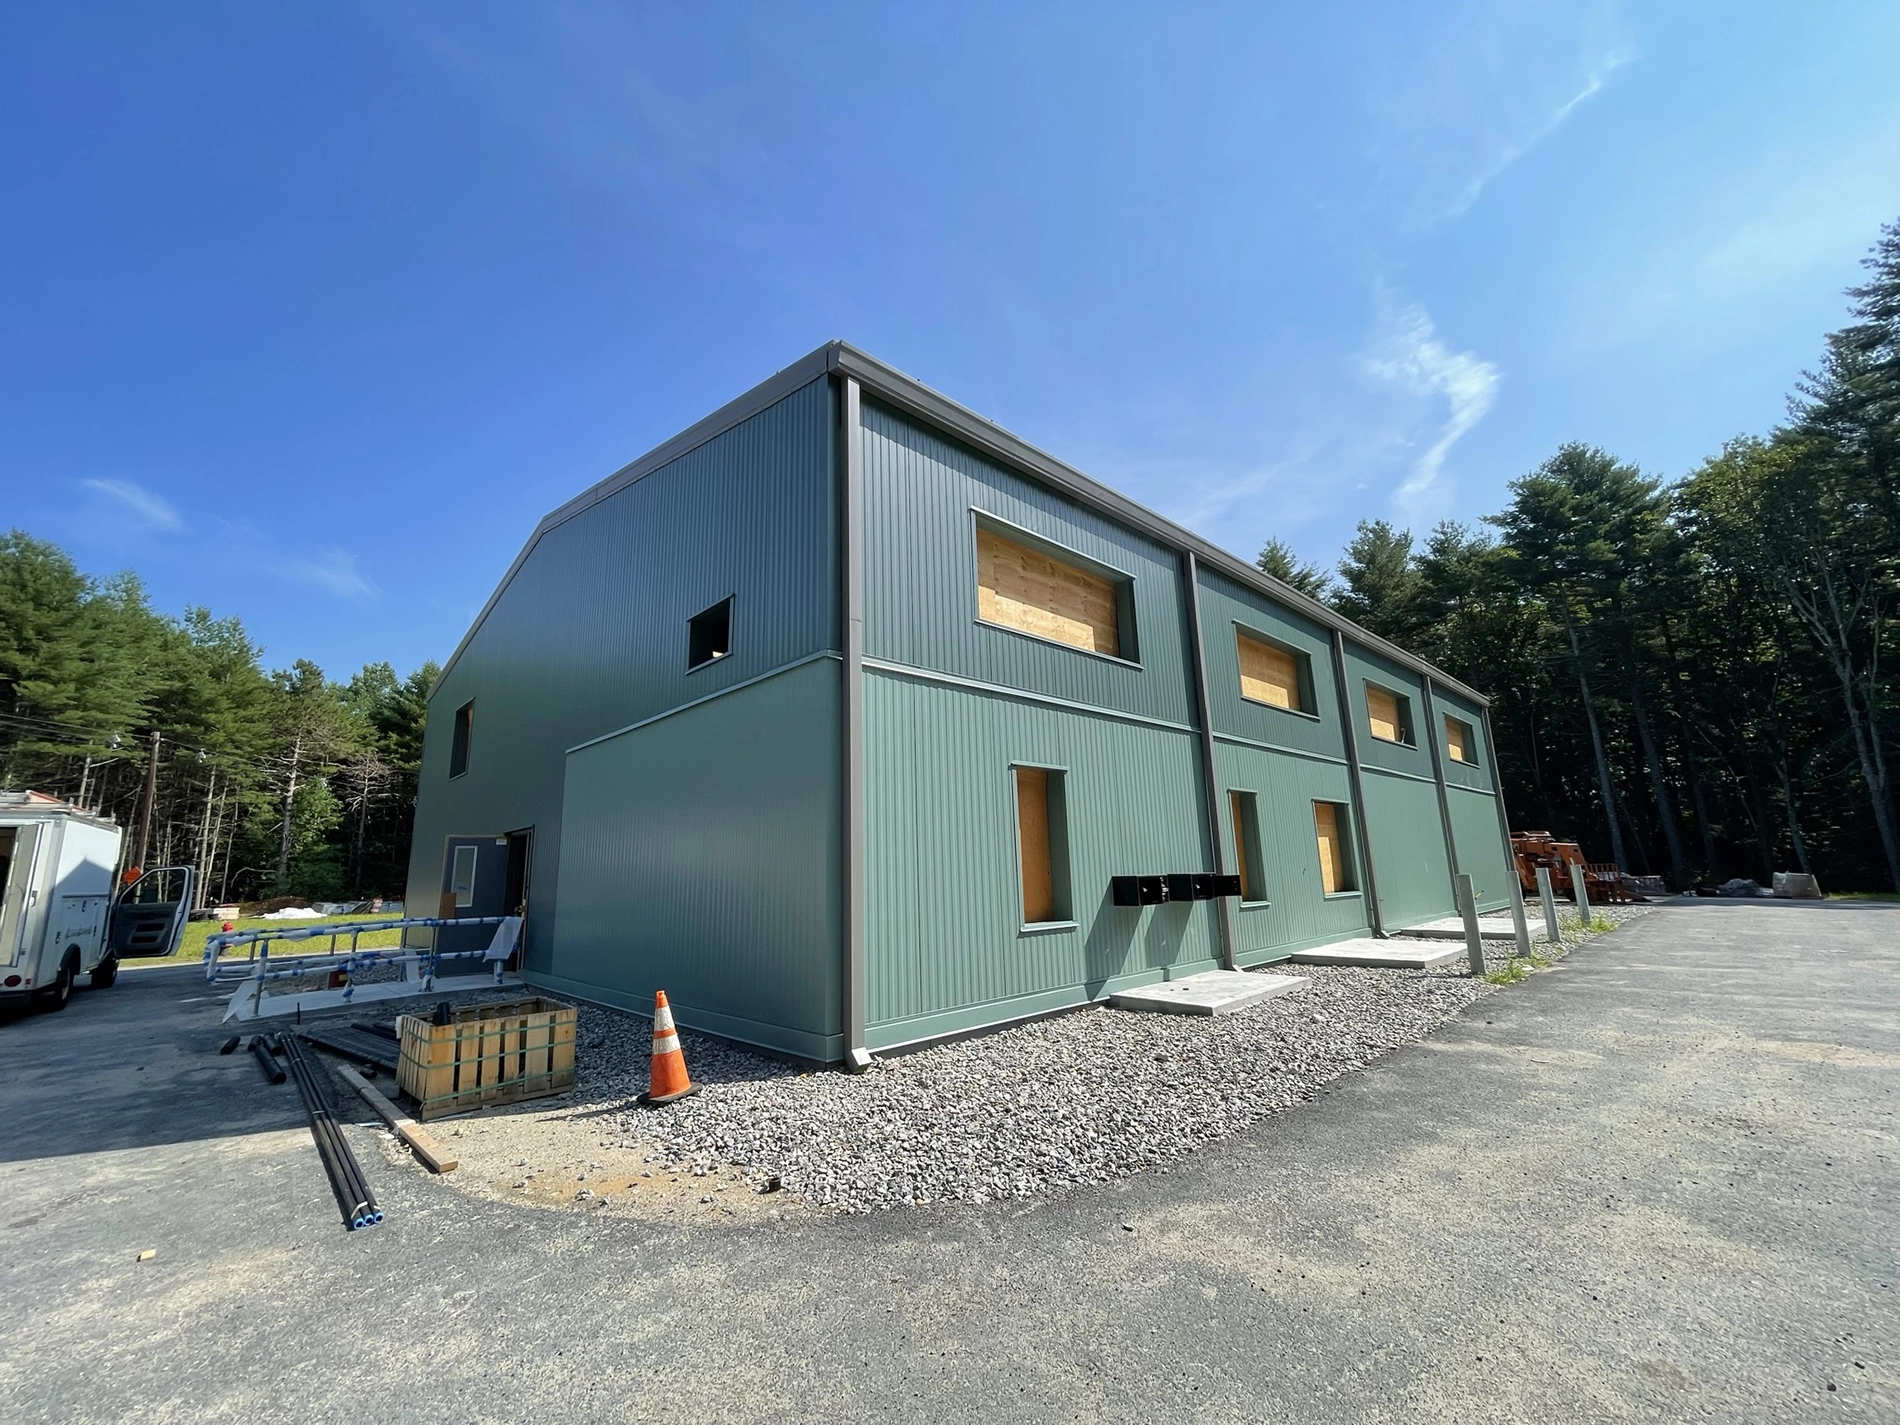 Water treatment system building under construction in Medfield, MA where Apex provided water quality studies and professional engineering services.